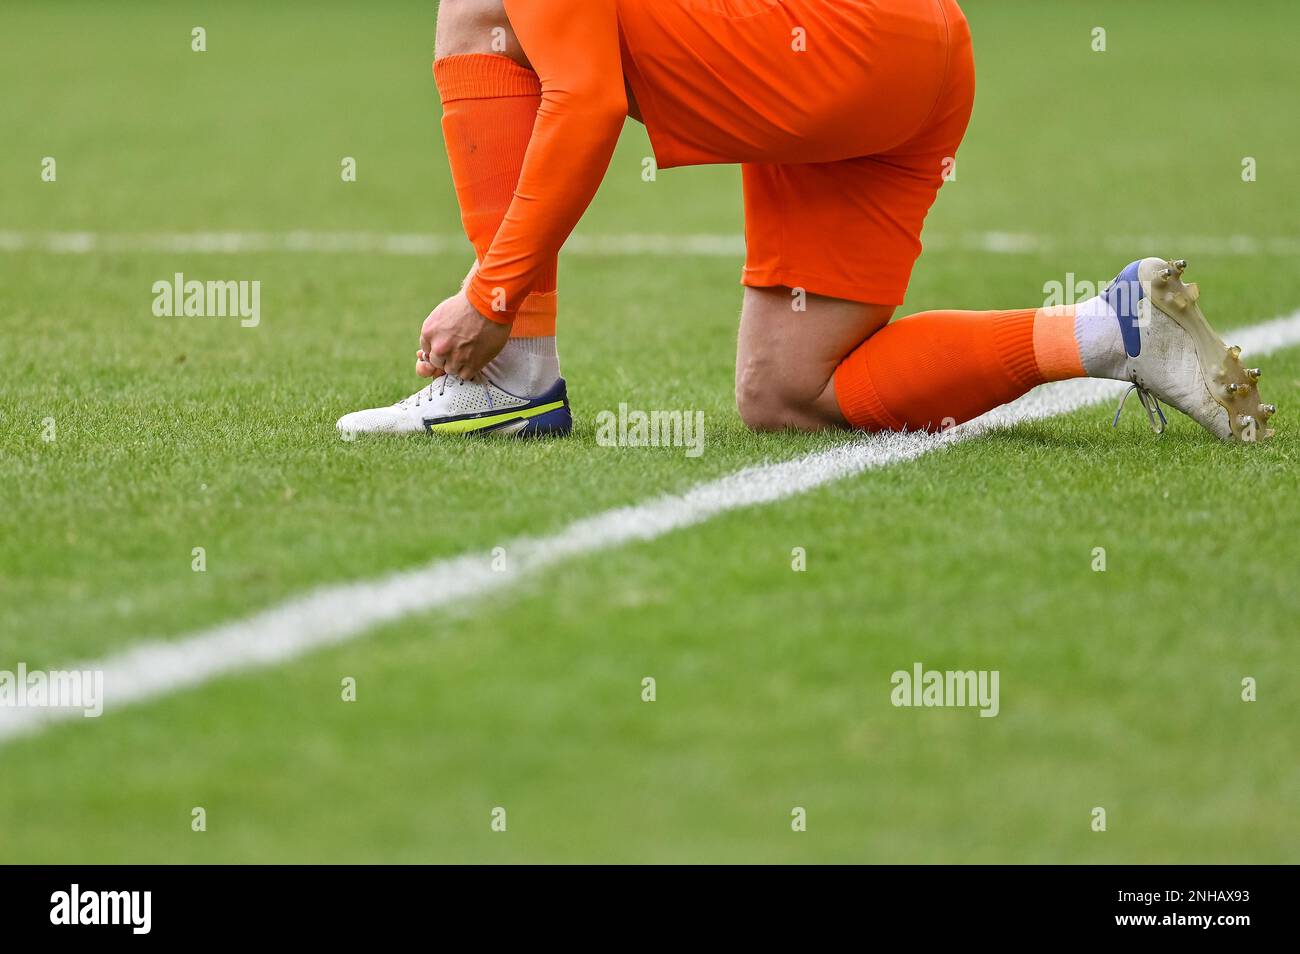 The football player itying his shoe on the turf of the pitch Stock Photo